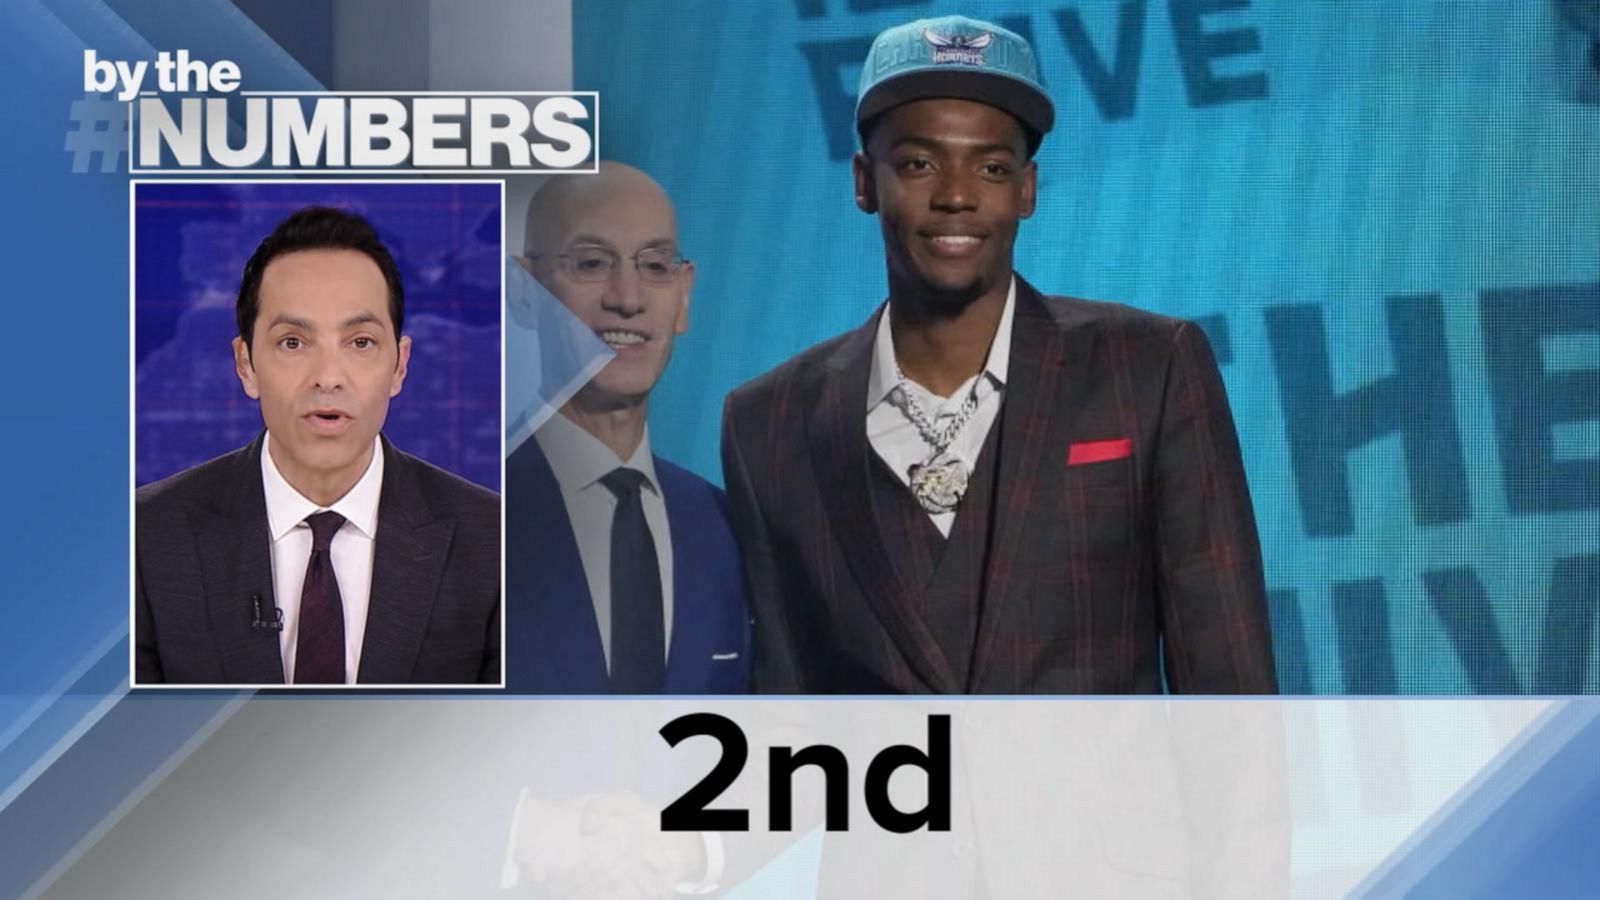 By the Numbers: NBA draft and Michael Jordan's big payday - Good Morning  America